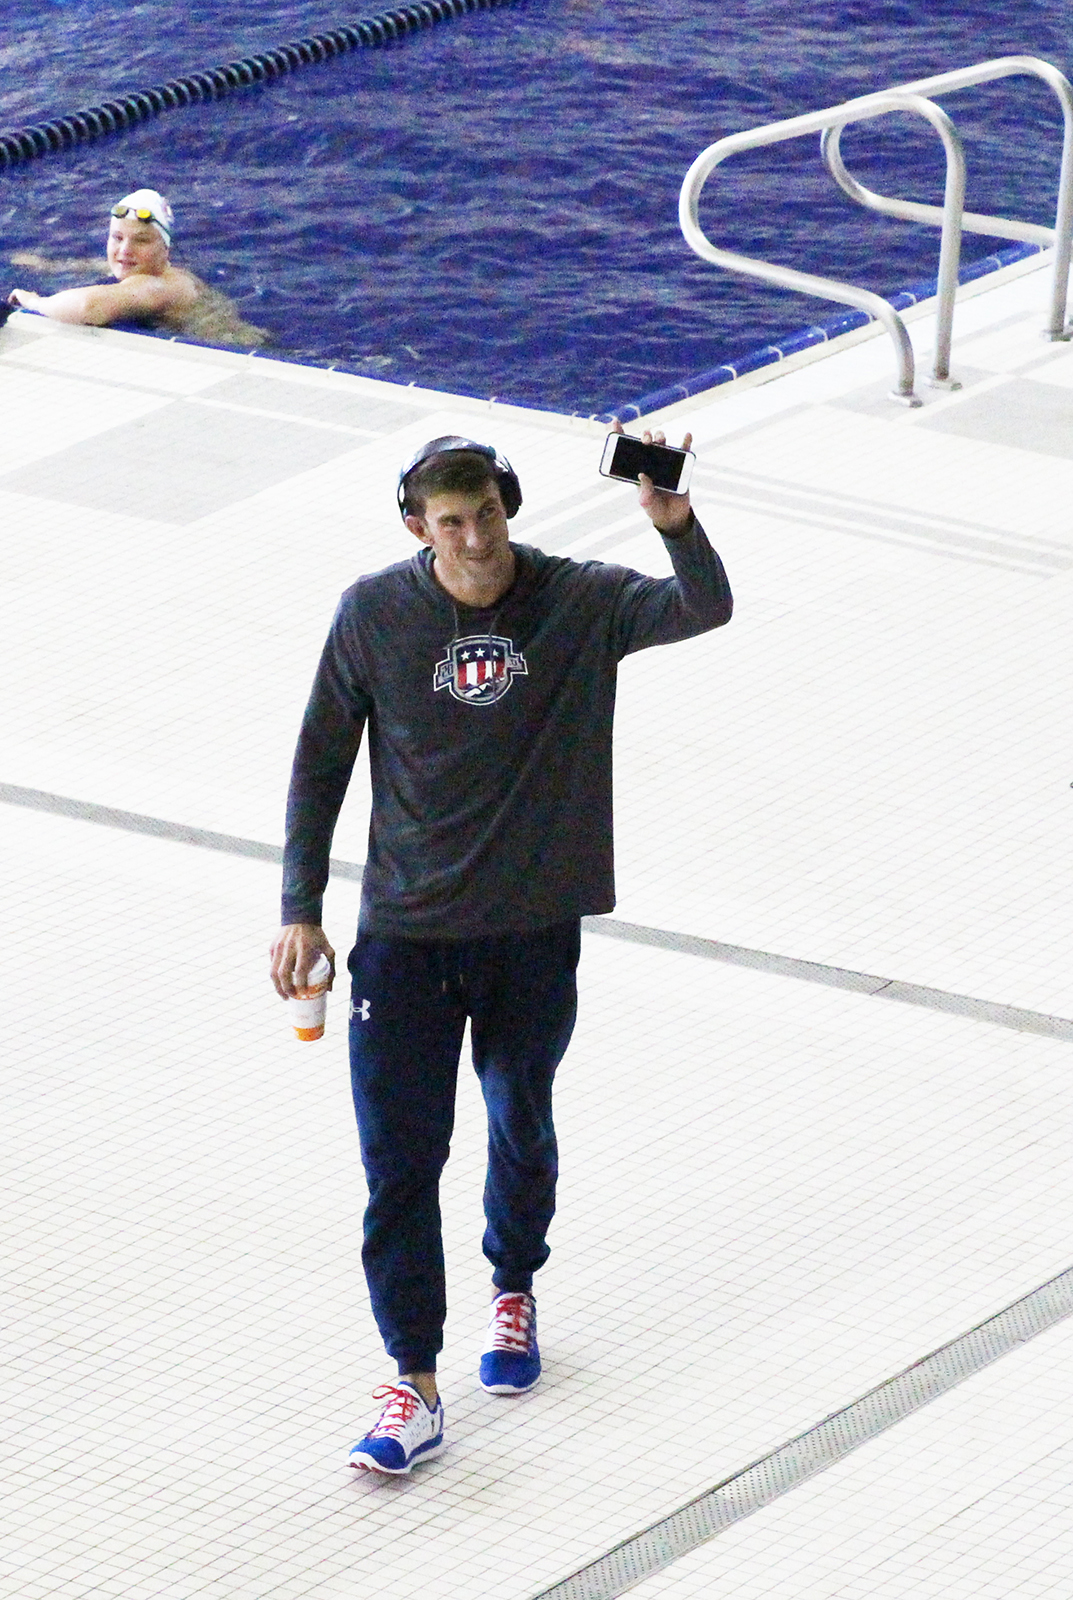 Michael Phelps waves to fans at an open practice at Georgia Tech's McAuley Aquatic Center on July 30, 2016